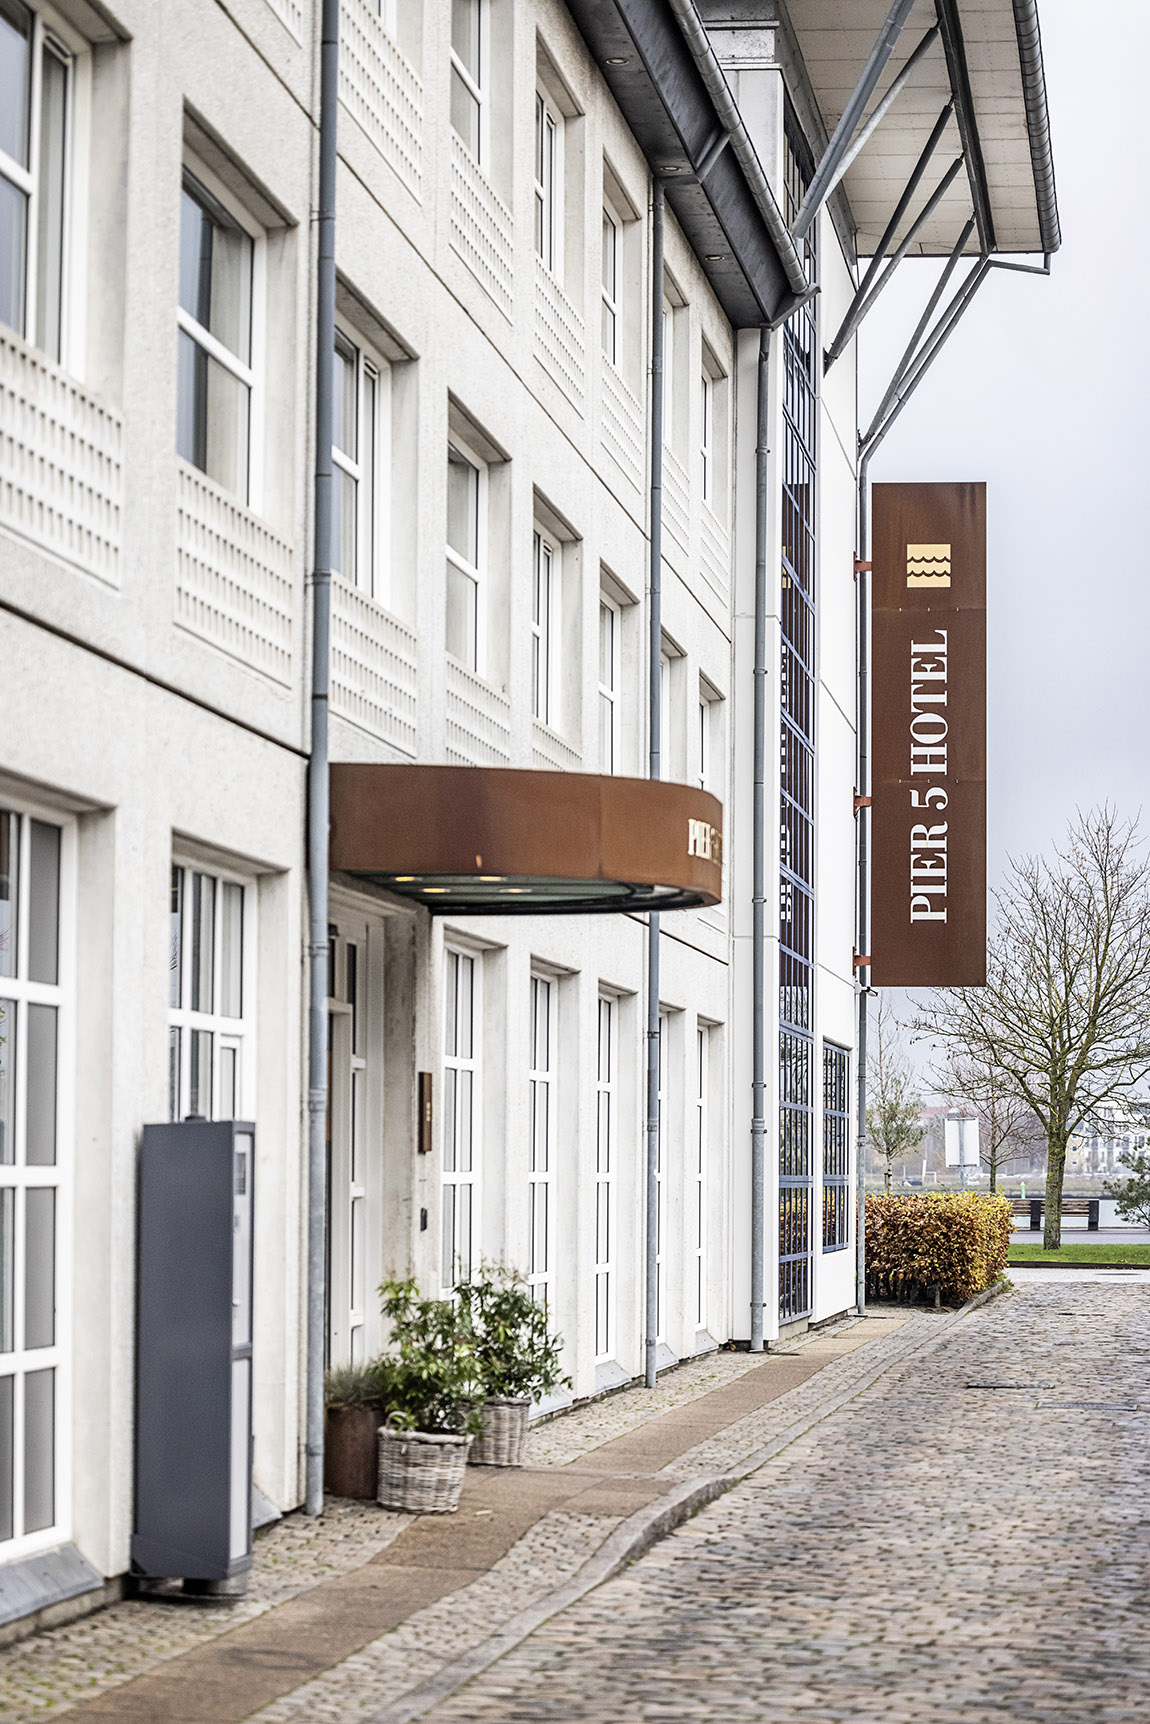 Pier 5 Hotel: Expect the unexpected – Aalborg’s new design hotel takes hospitality to the next level